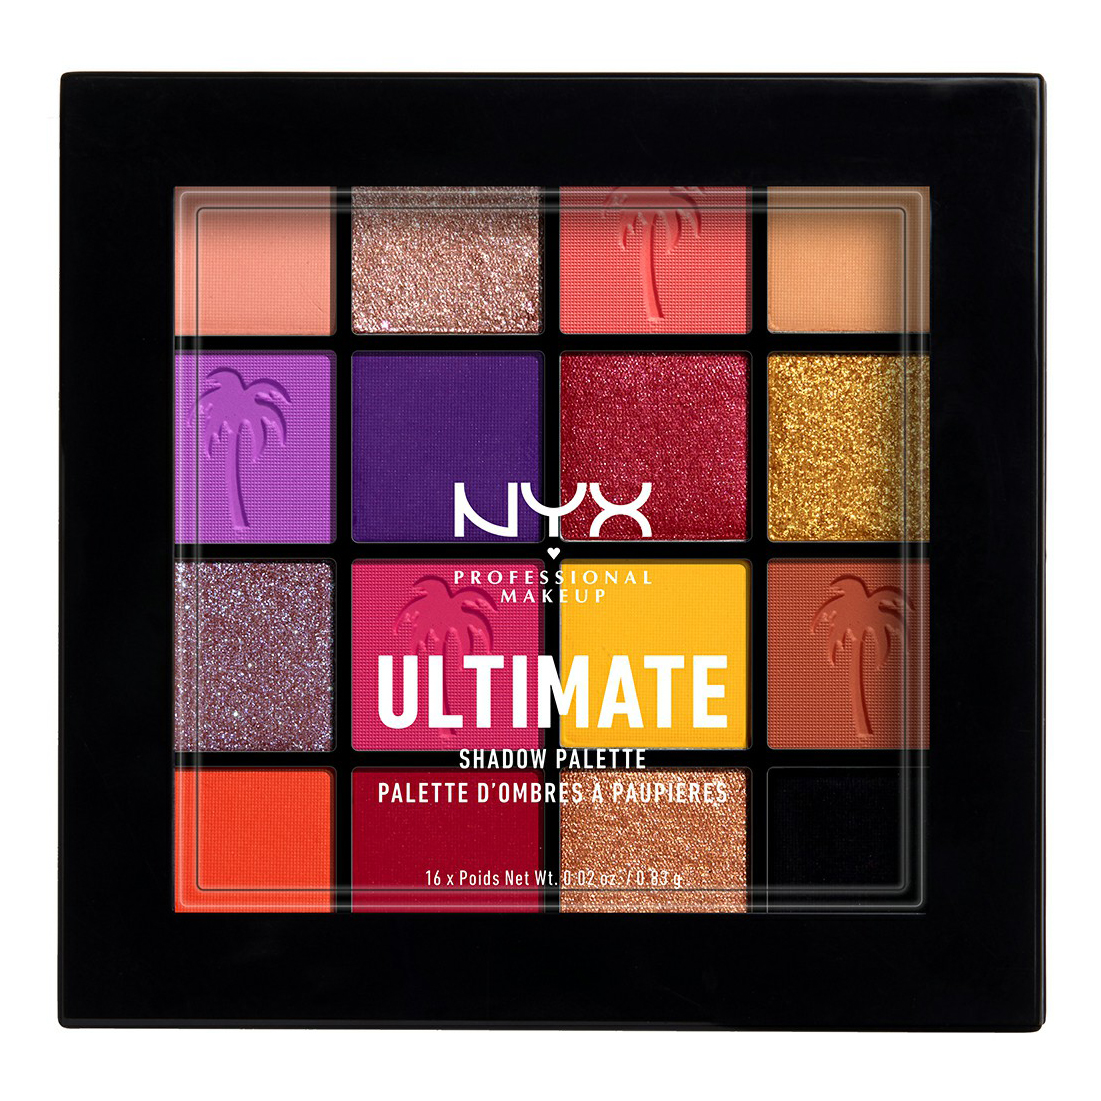 Тени для век NYX Professional MakeUp Ultimate Shadow Palette 13 Festival 105 г тени для век ga de velveteen eye shadow palette 47 nude in the city 8 1 г